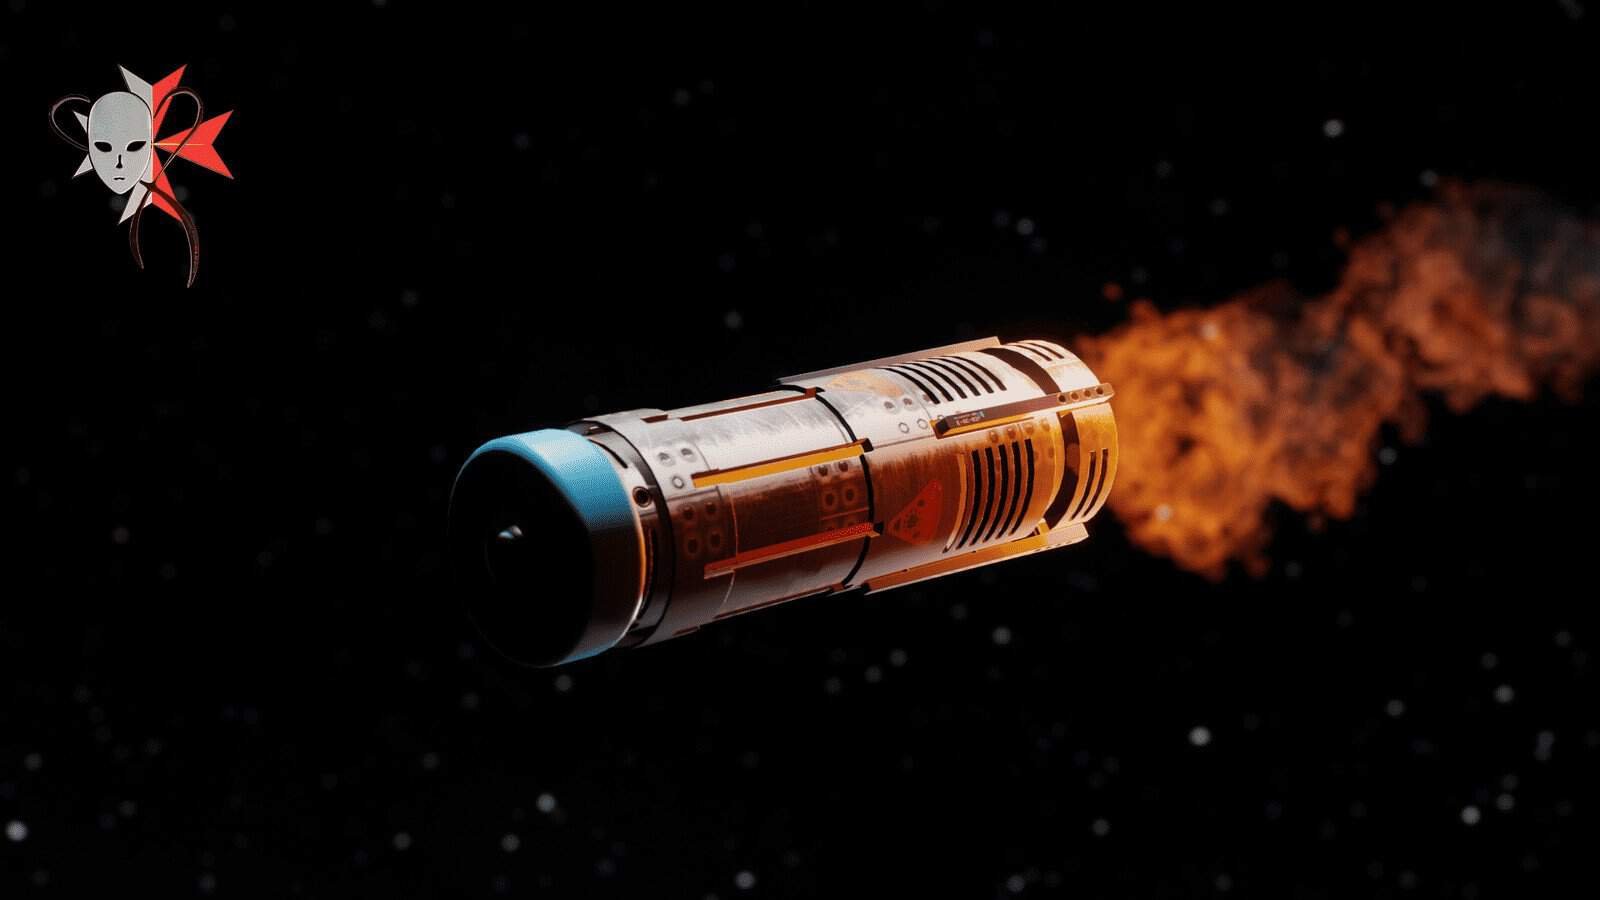 Portfolio - 3D model - Cyclone MK1 Missile Pack Animated.